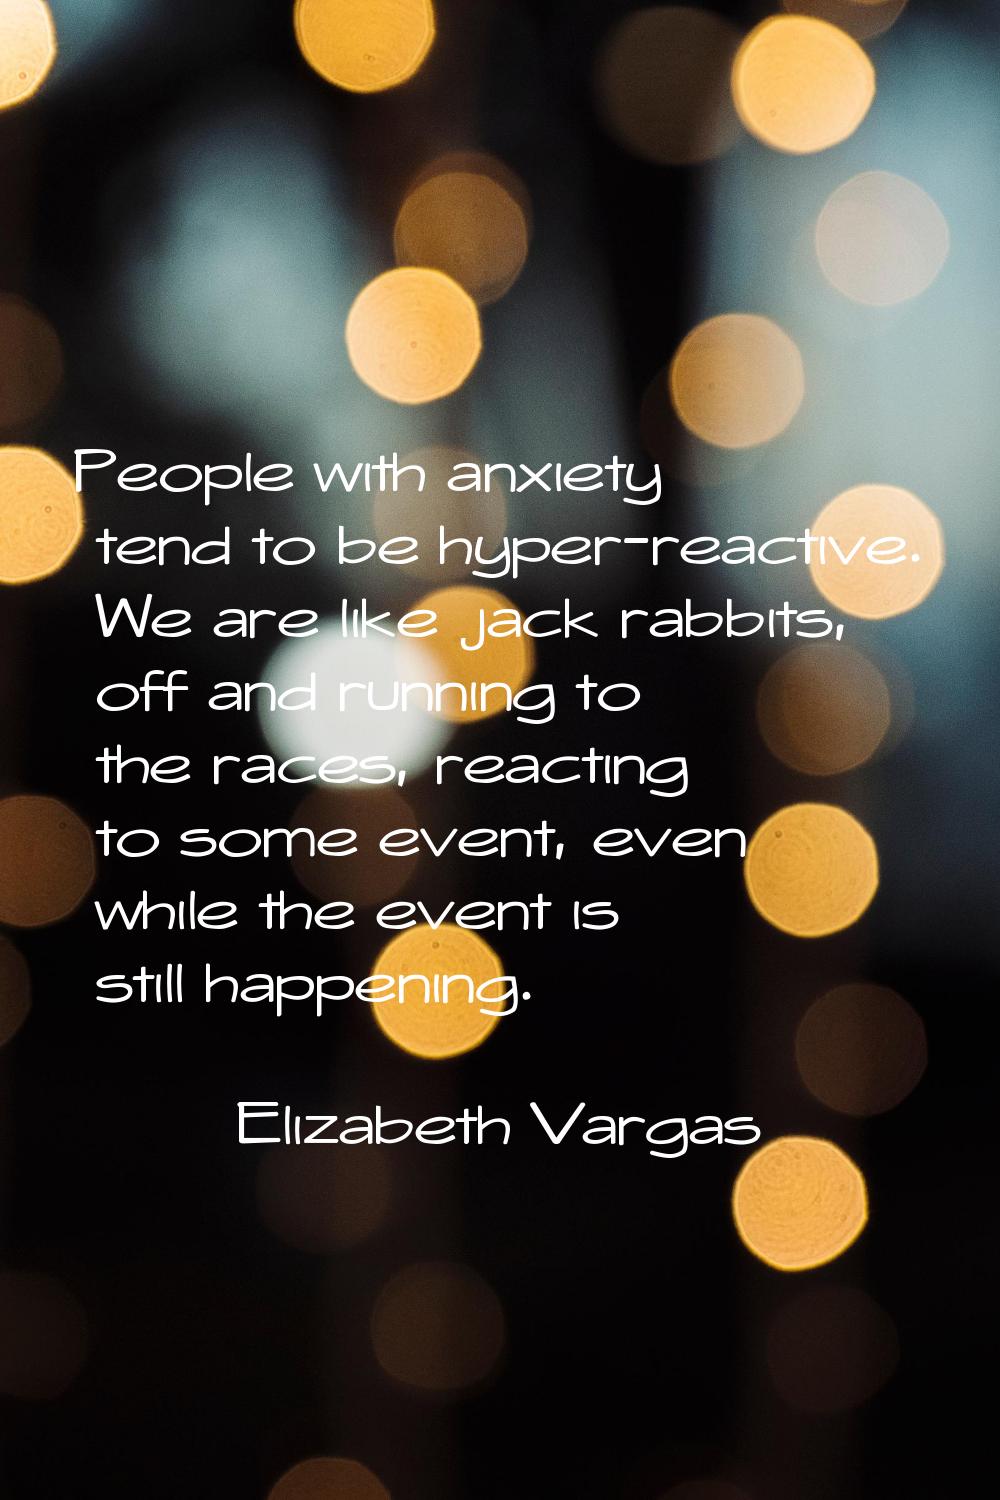 People with anxiety tend to be hyper-reactive. We are like jack rabbits, off and running to the rac